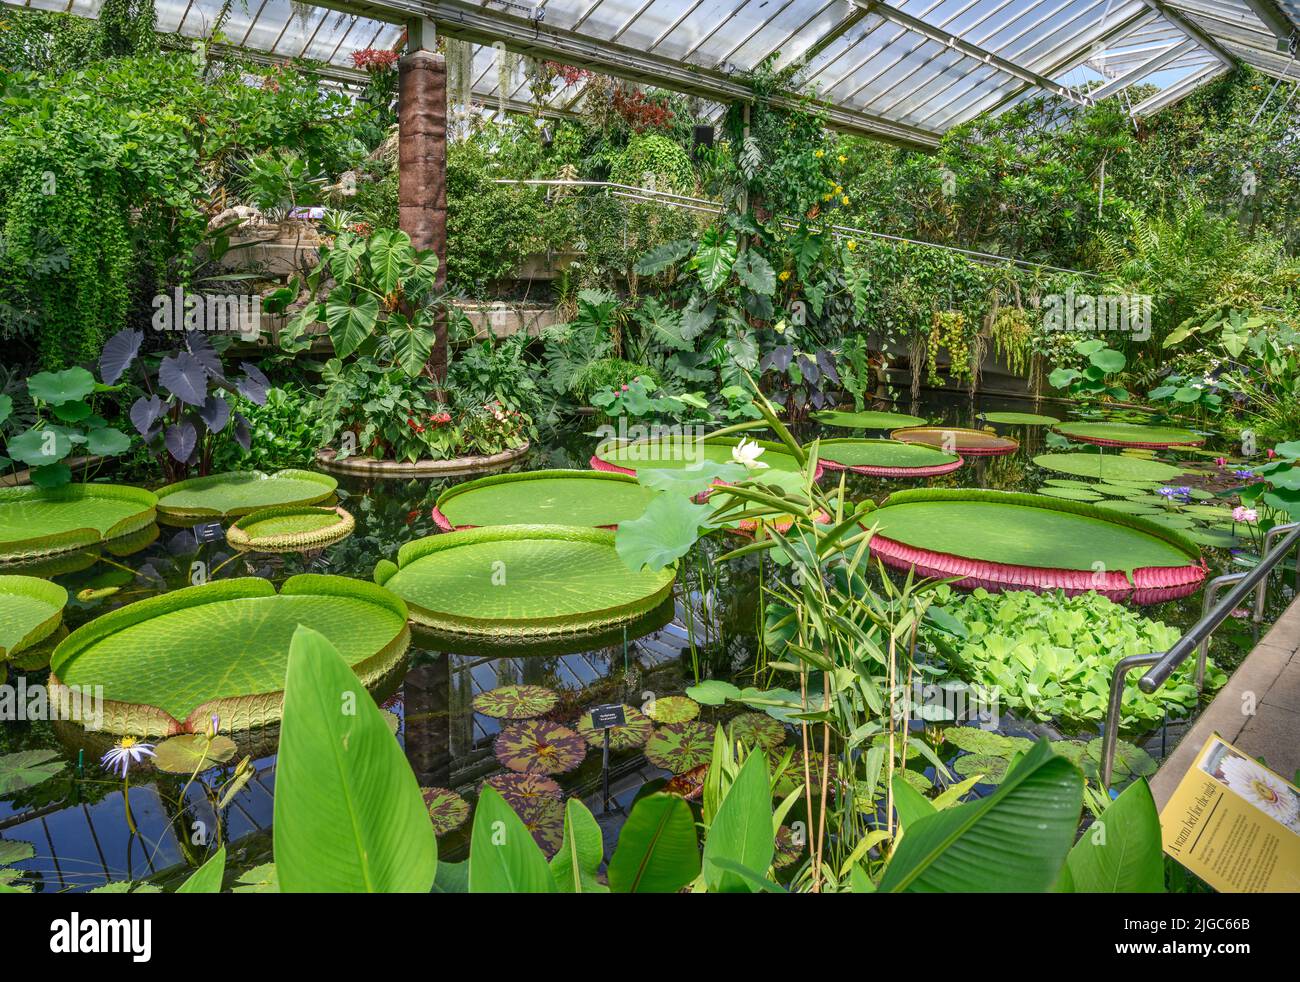 Giant Water Lilies (victoria amazonica), Princess of Wales Conservatory, Kew Gardens, Richmond, Londres, Angleterre, ROYAUME-UNI Banque D'Images